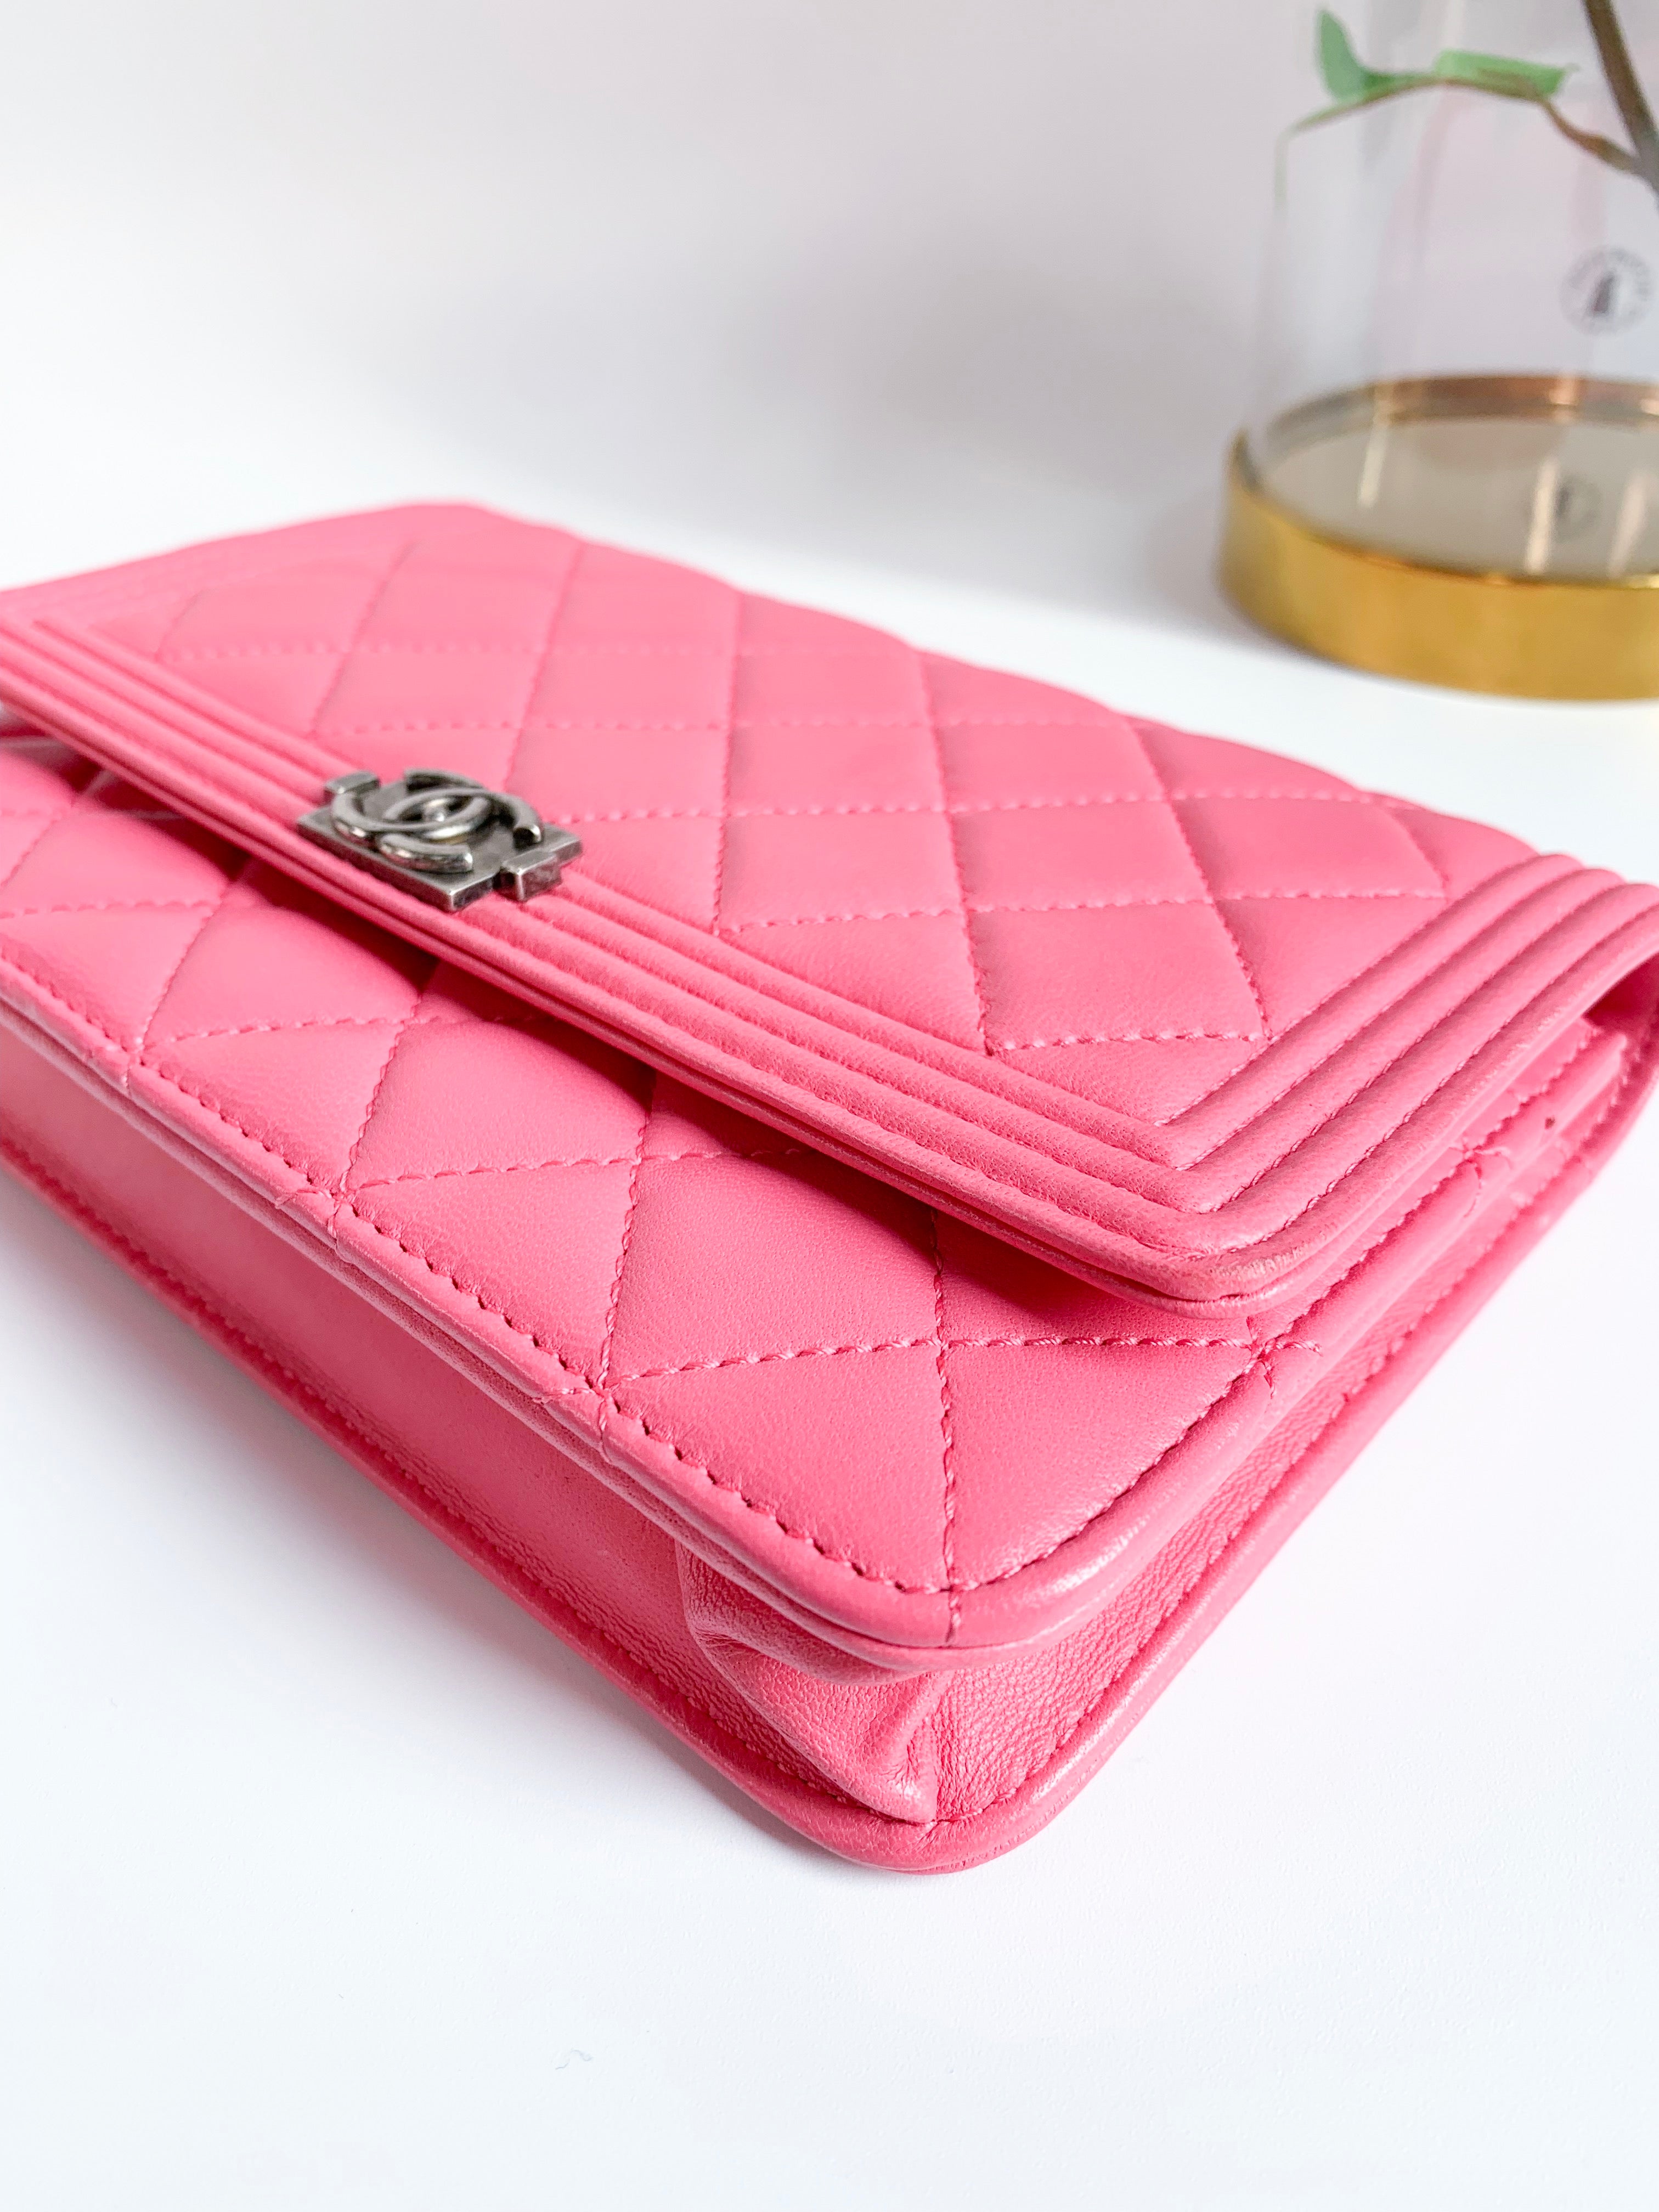 CHANEL, Bags, Chanelauthentic Nwt Large Pink Leather Boy Wallet